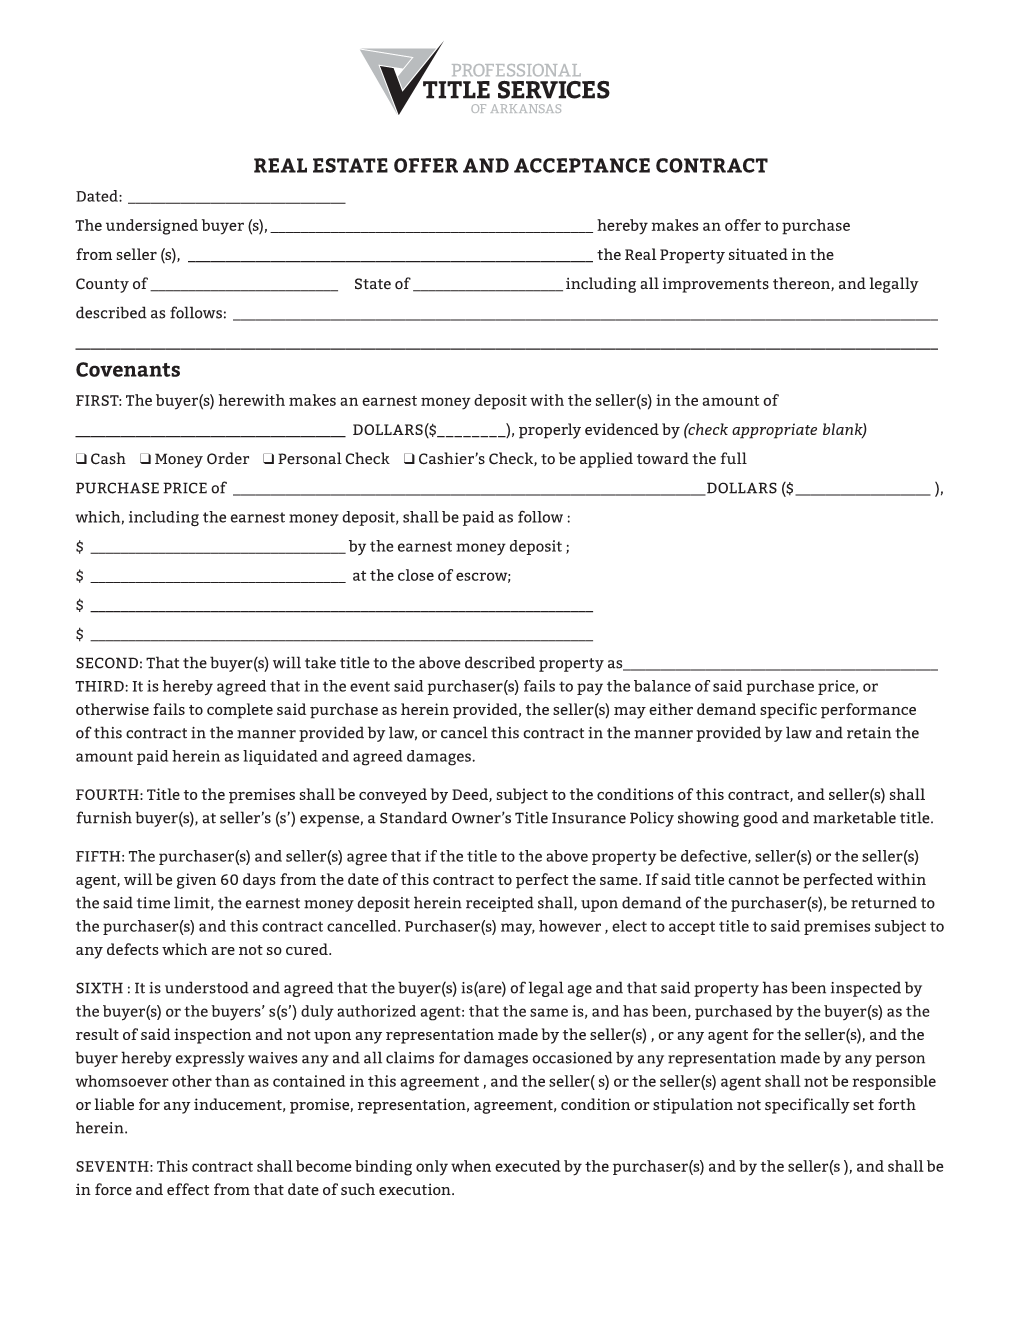 REAL ESTATE OFFER and ACCEPTANCE CONTRACT Covenants